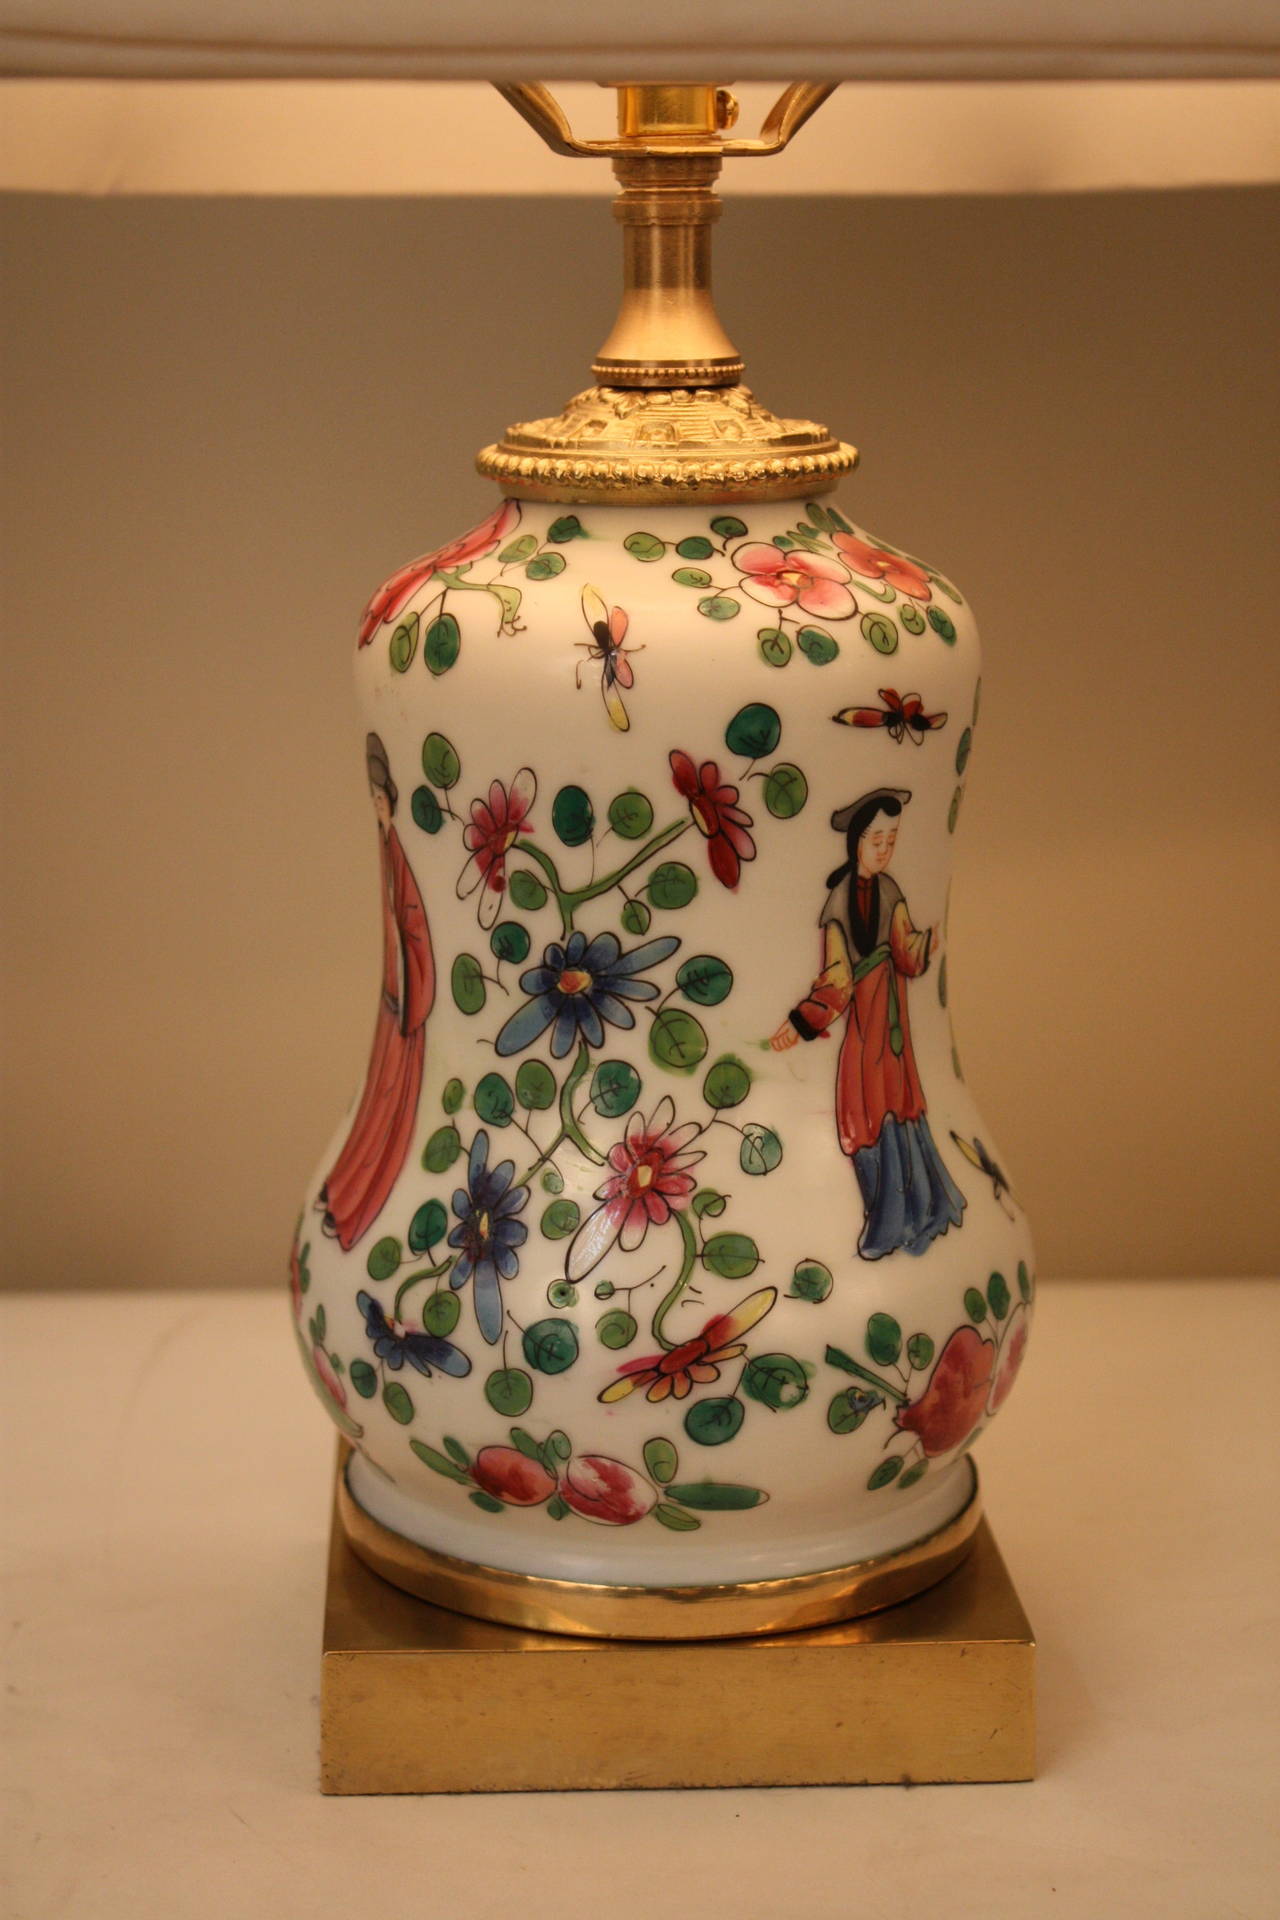 A beautiful hand-painted porcelain modified and electrified oil lamp influenced by oriental art with Classic bronze mounting makes this piece absolutely stunning.